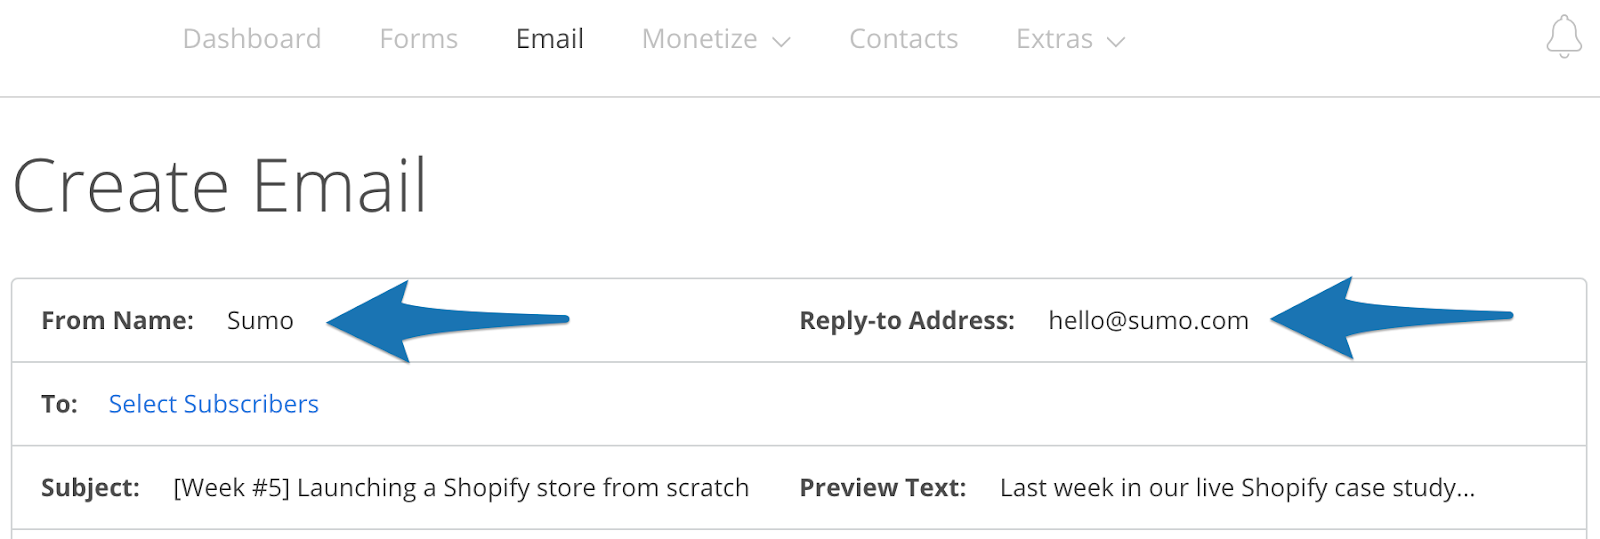 Screenshot showing how to update email sender information in Sumo